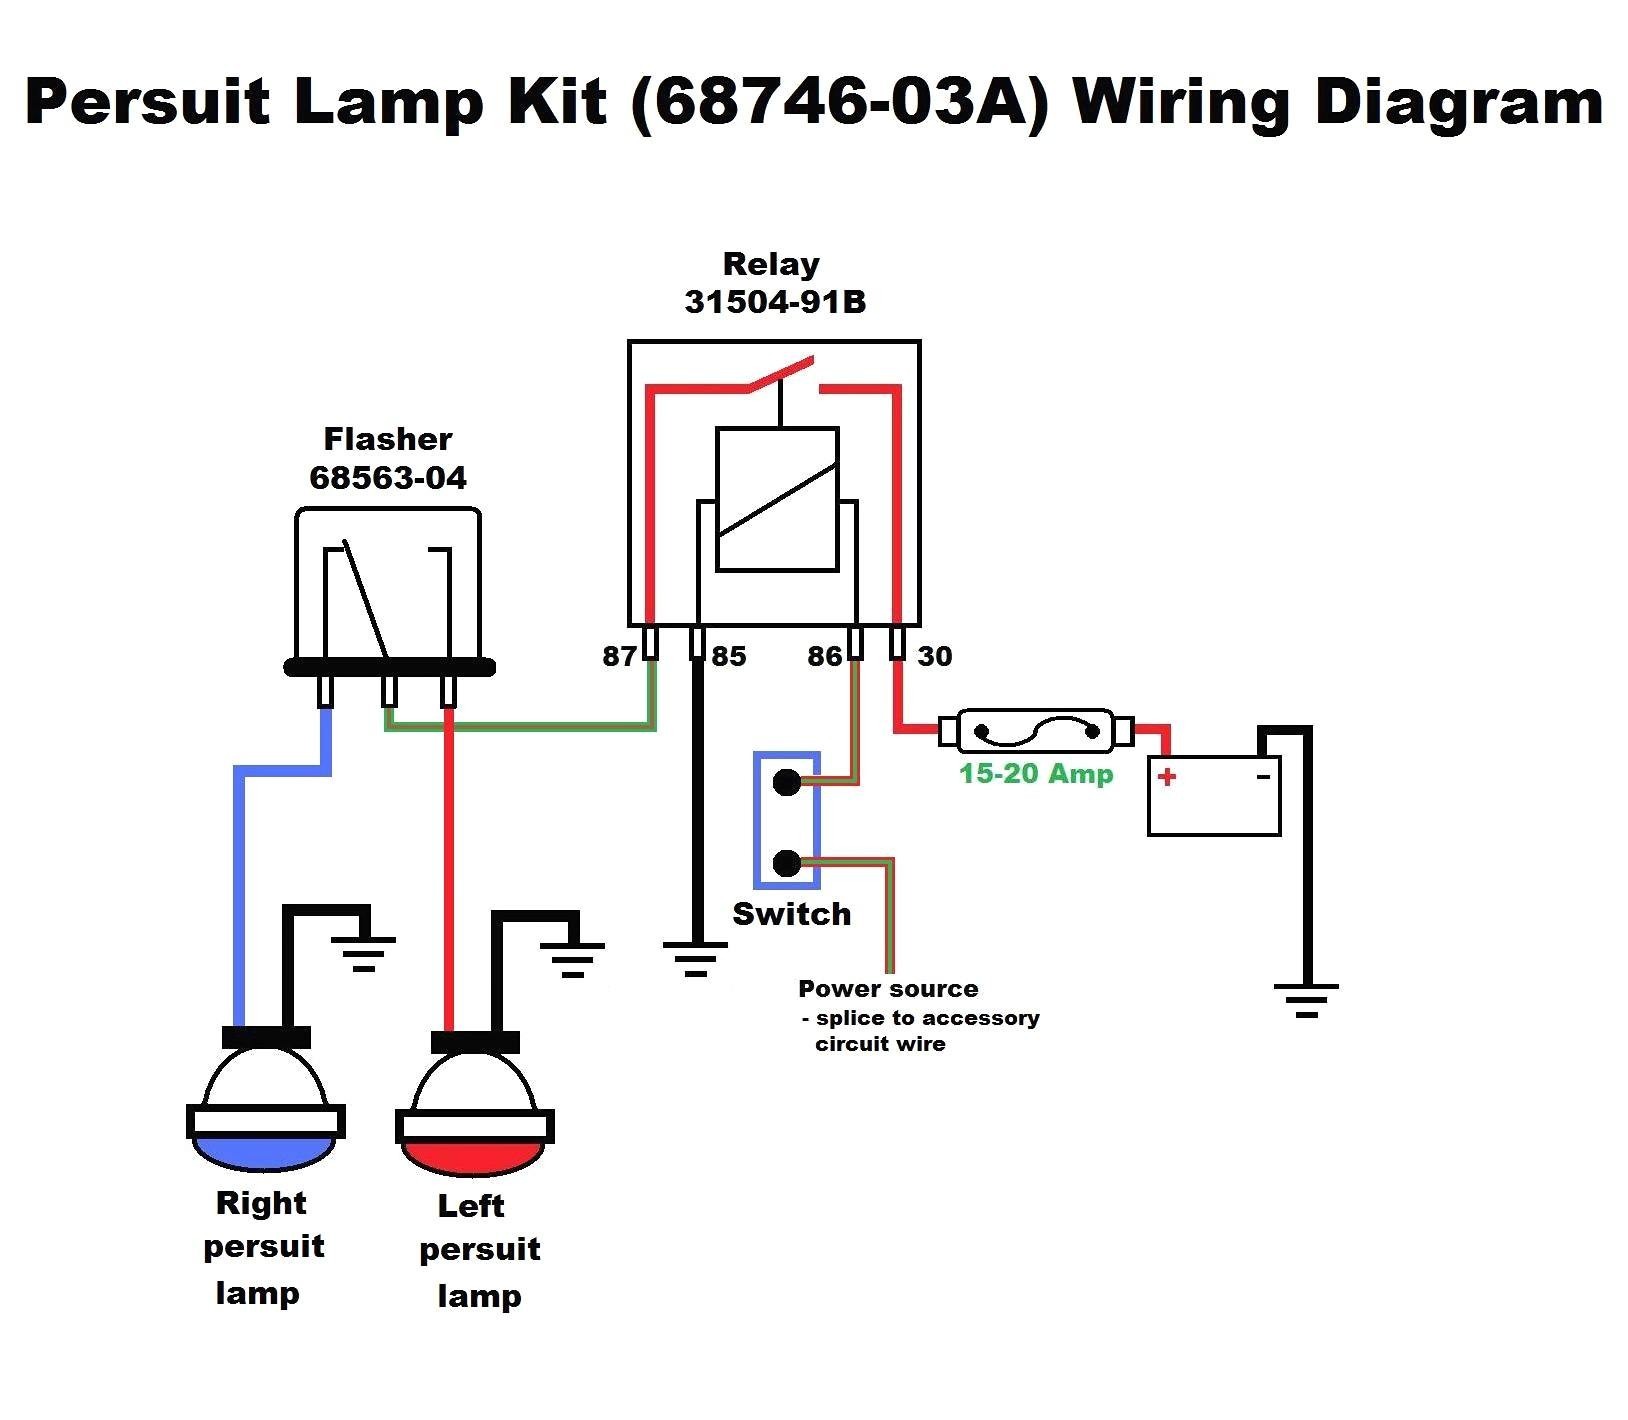 How 2 Pin Flasher Relay Work 2 Pin Flasher Relay Wiring Diagram Of How 2 Pin Flasher Relay Work